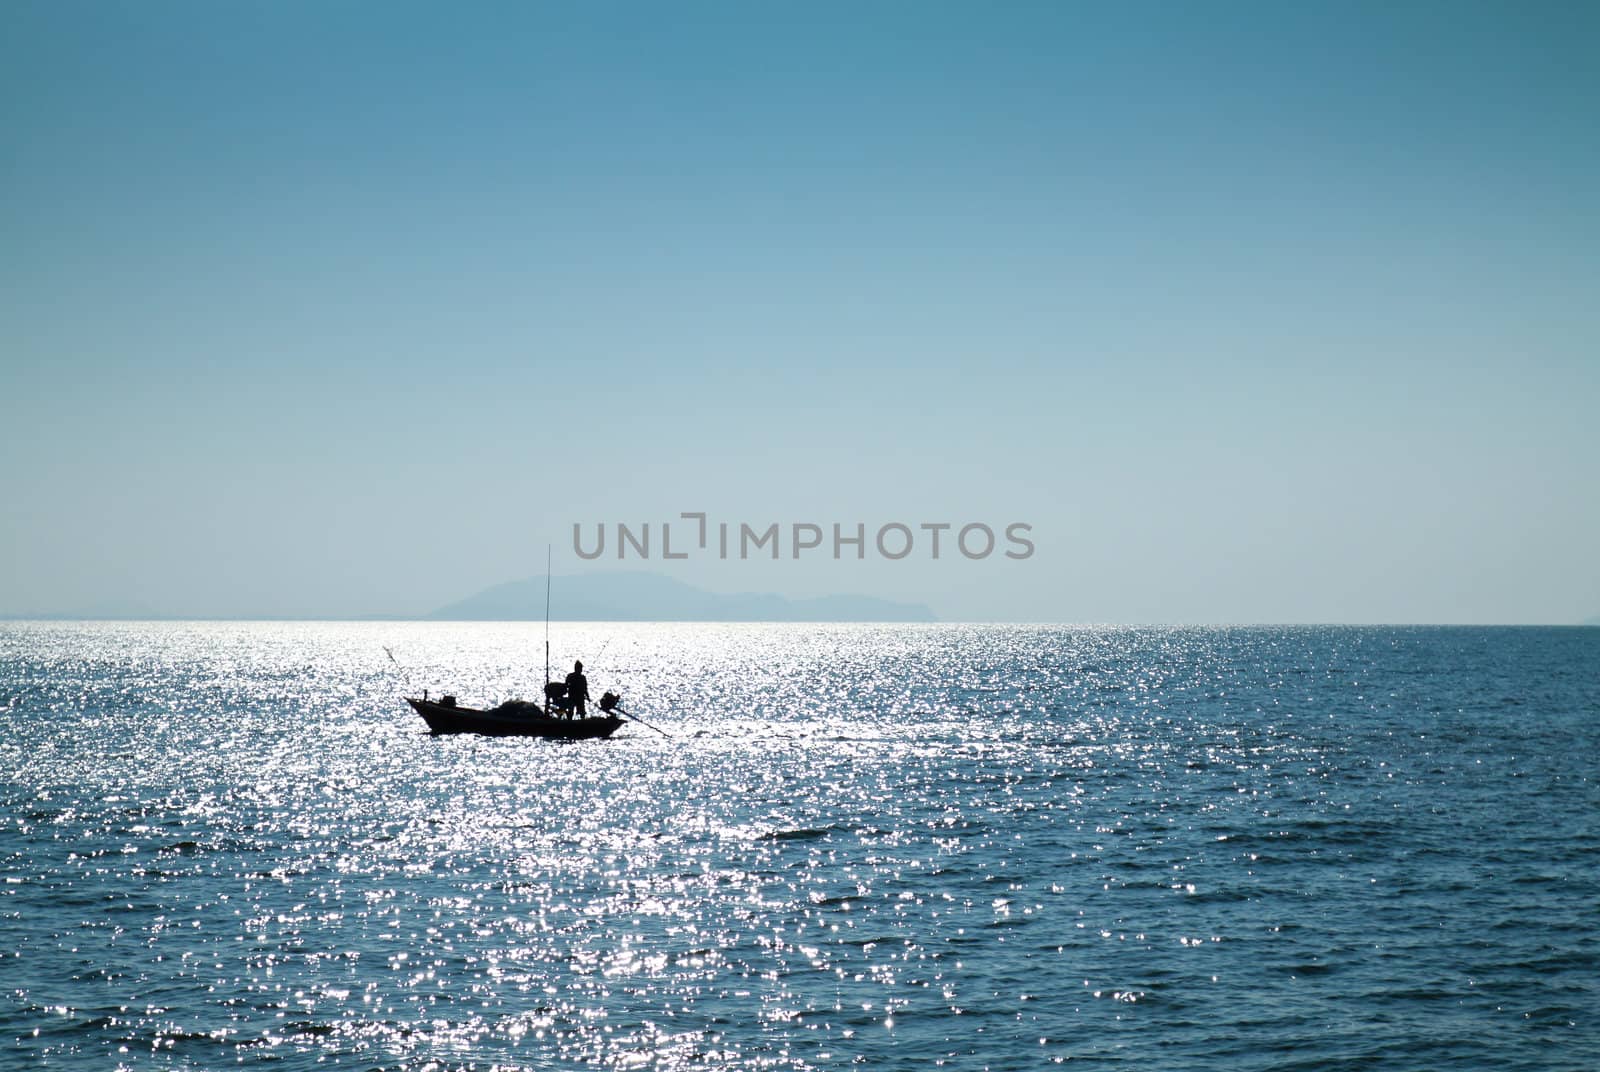 The silhouette of a fisherman with his boat in the sea by nuchylee